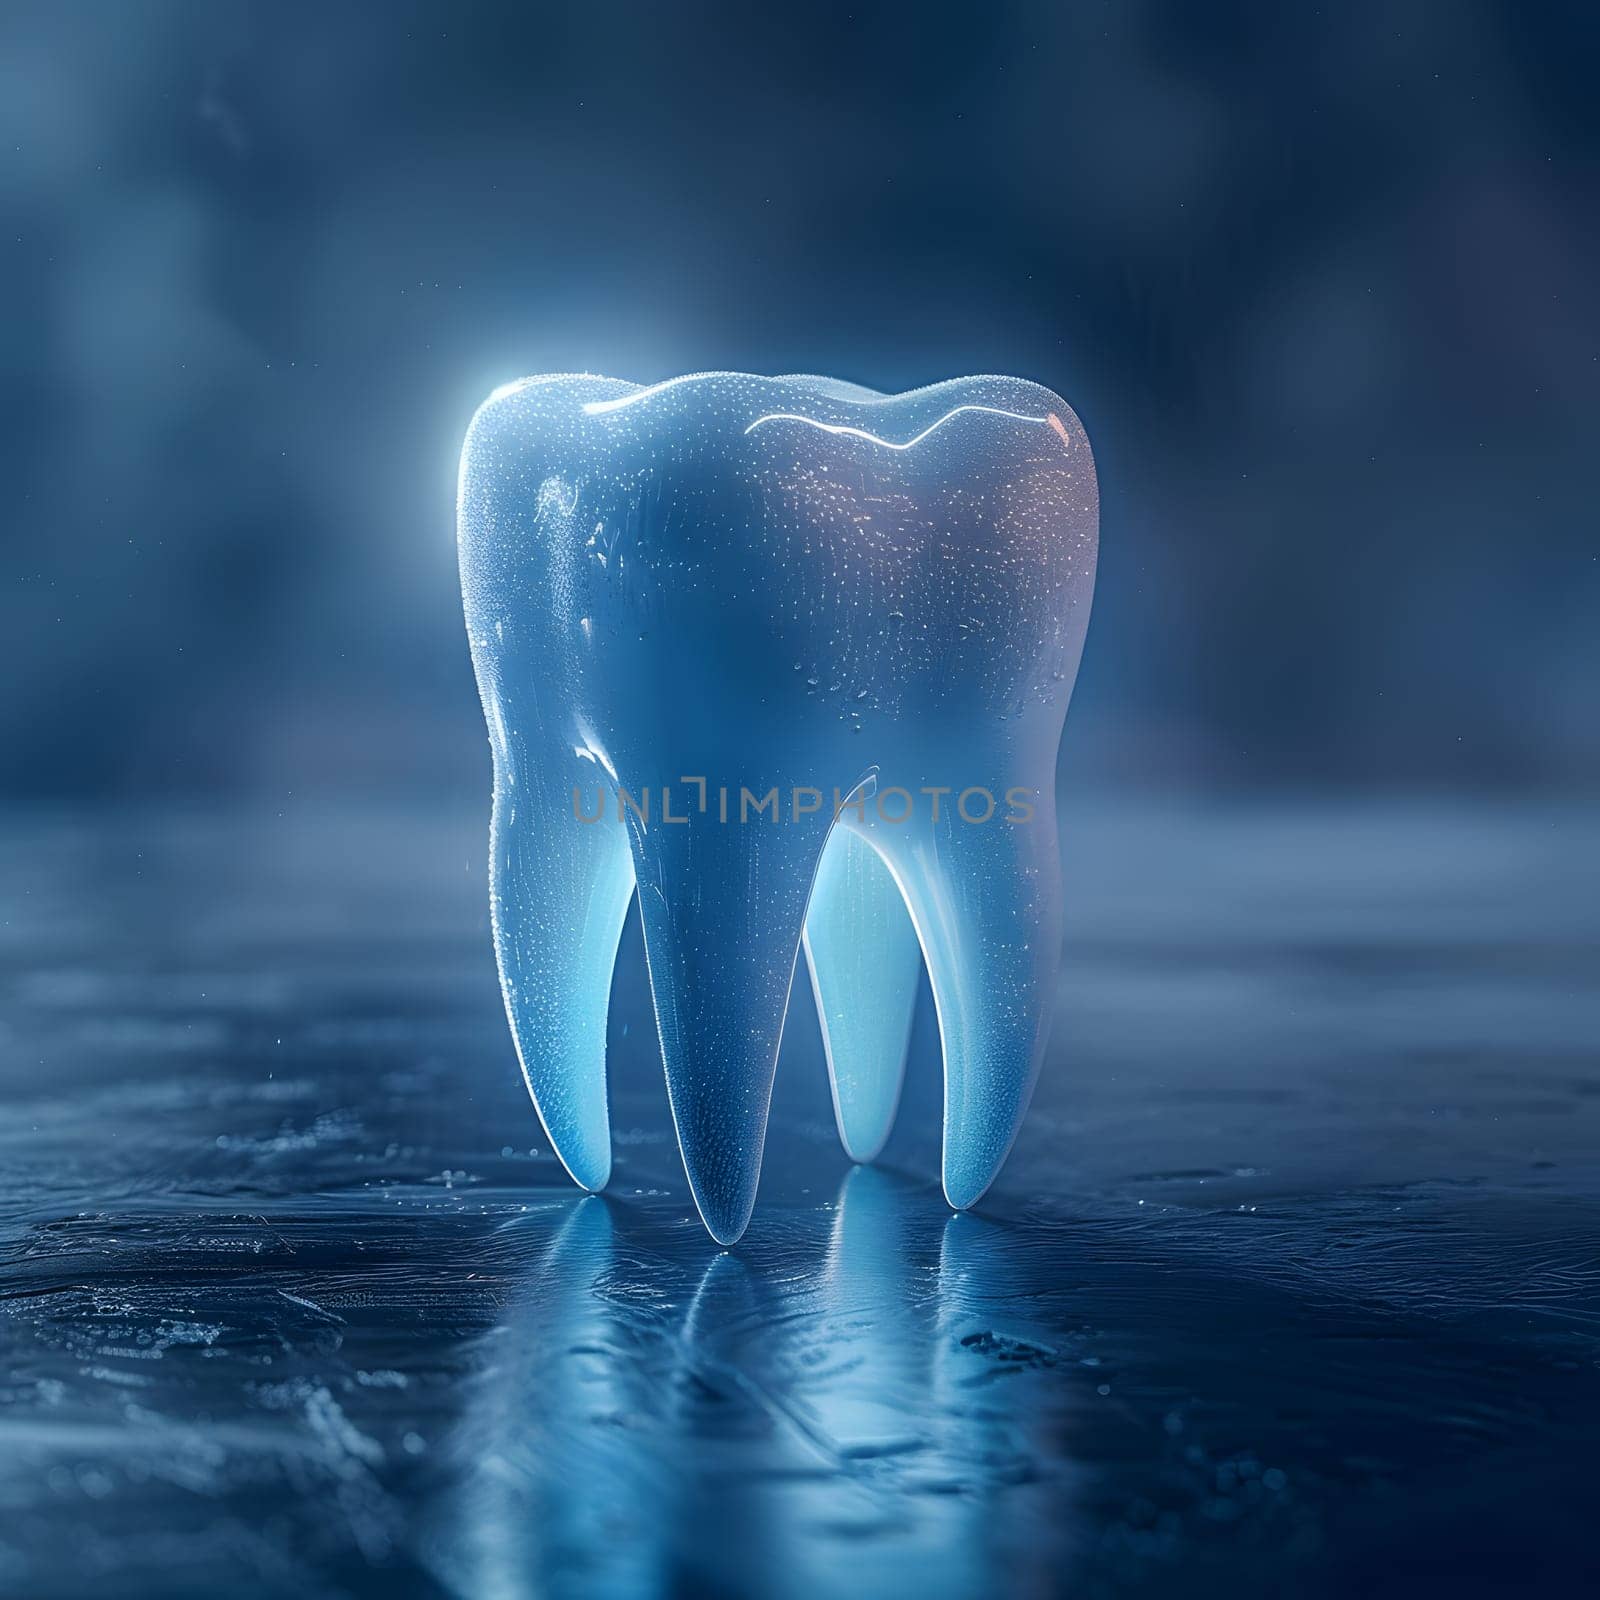 A tooth is illuminated with electric blue fluid in a dark room, captured in stunning macro photography. The transparent material glows like a sky at night